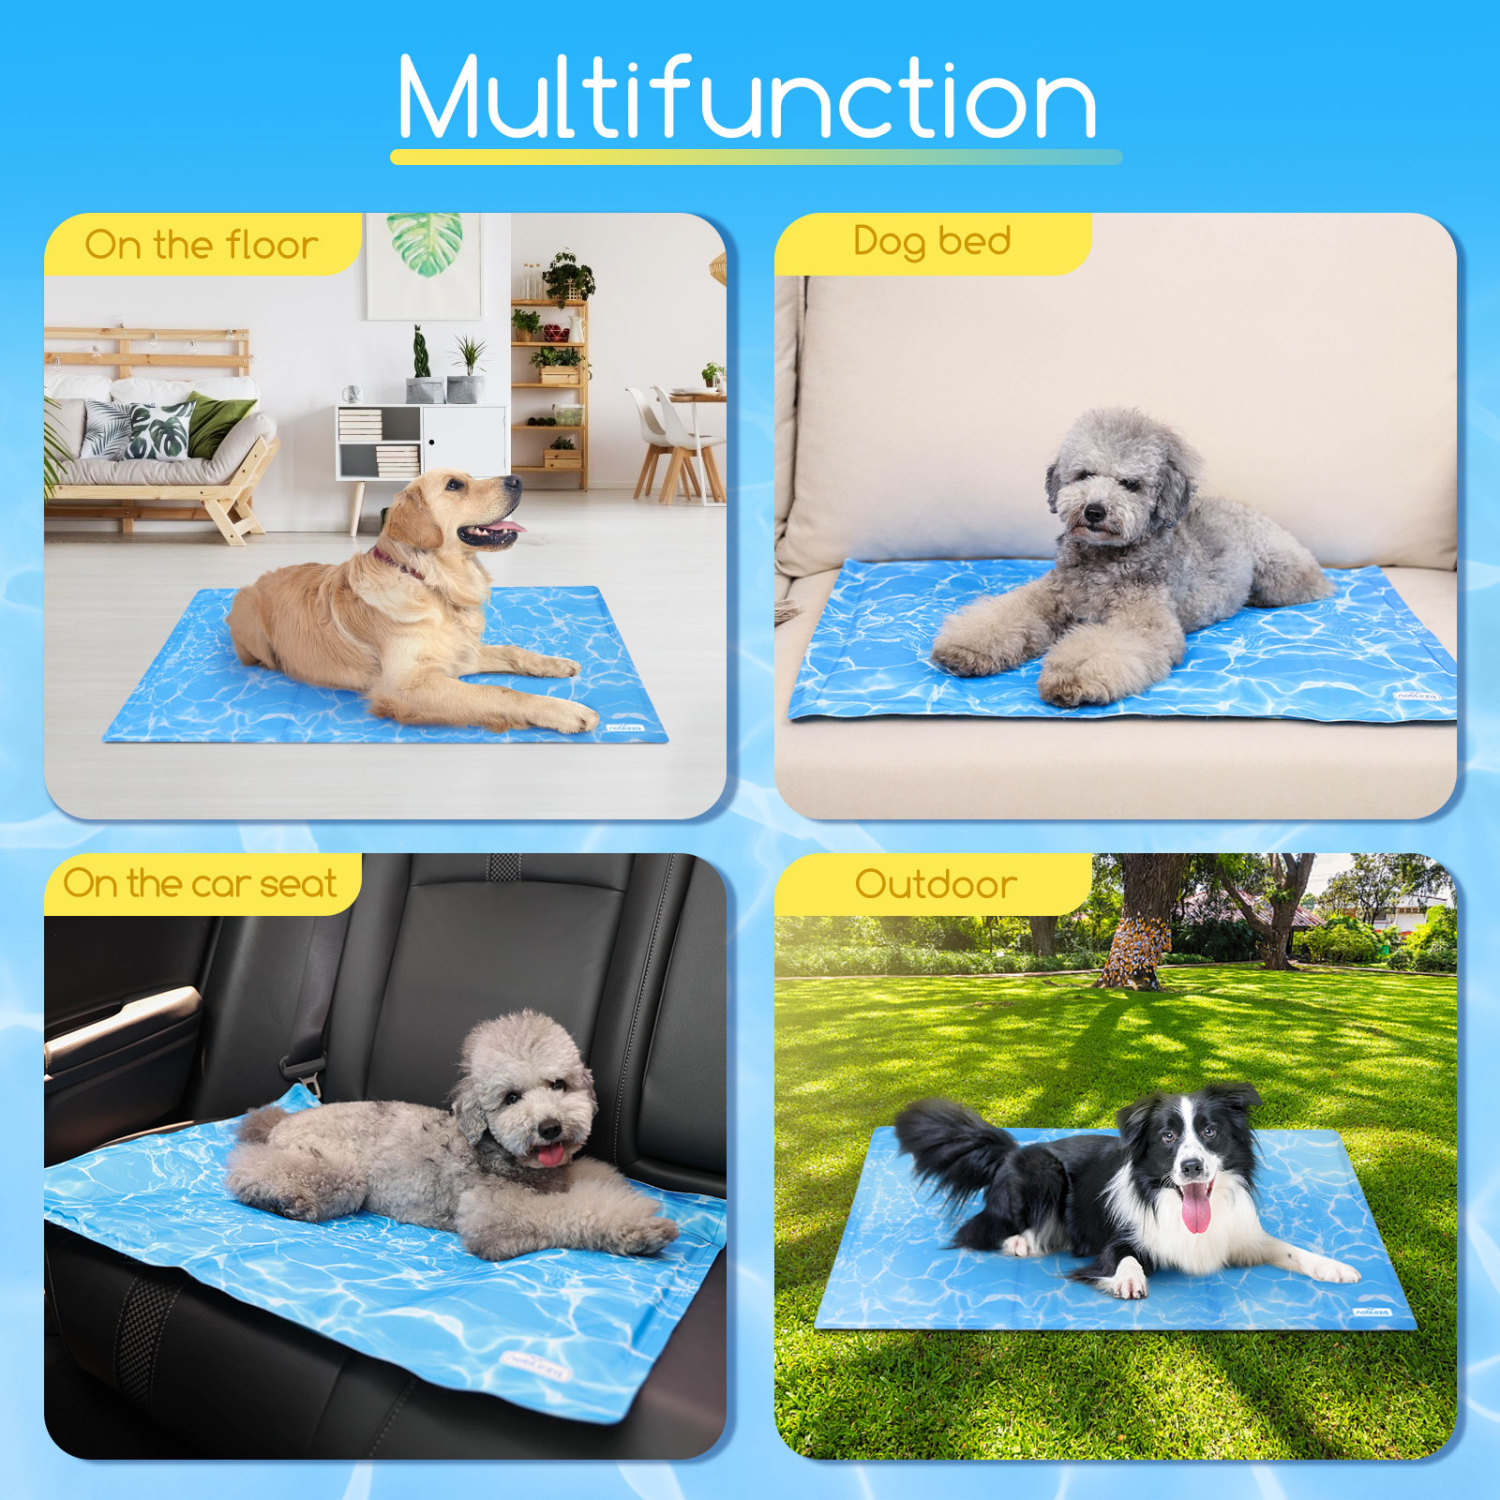 Nobleza Dog Cooling Mat, Durable Leakproof Cooling Pad for Medium Dogs Cats Puppy in Hot Summer Pressure Activated Gel Cooling Mat No Water or Electricity Needed 19.7